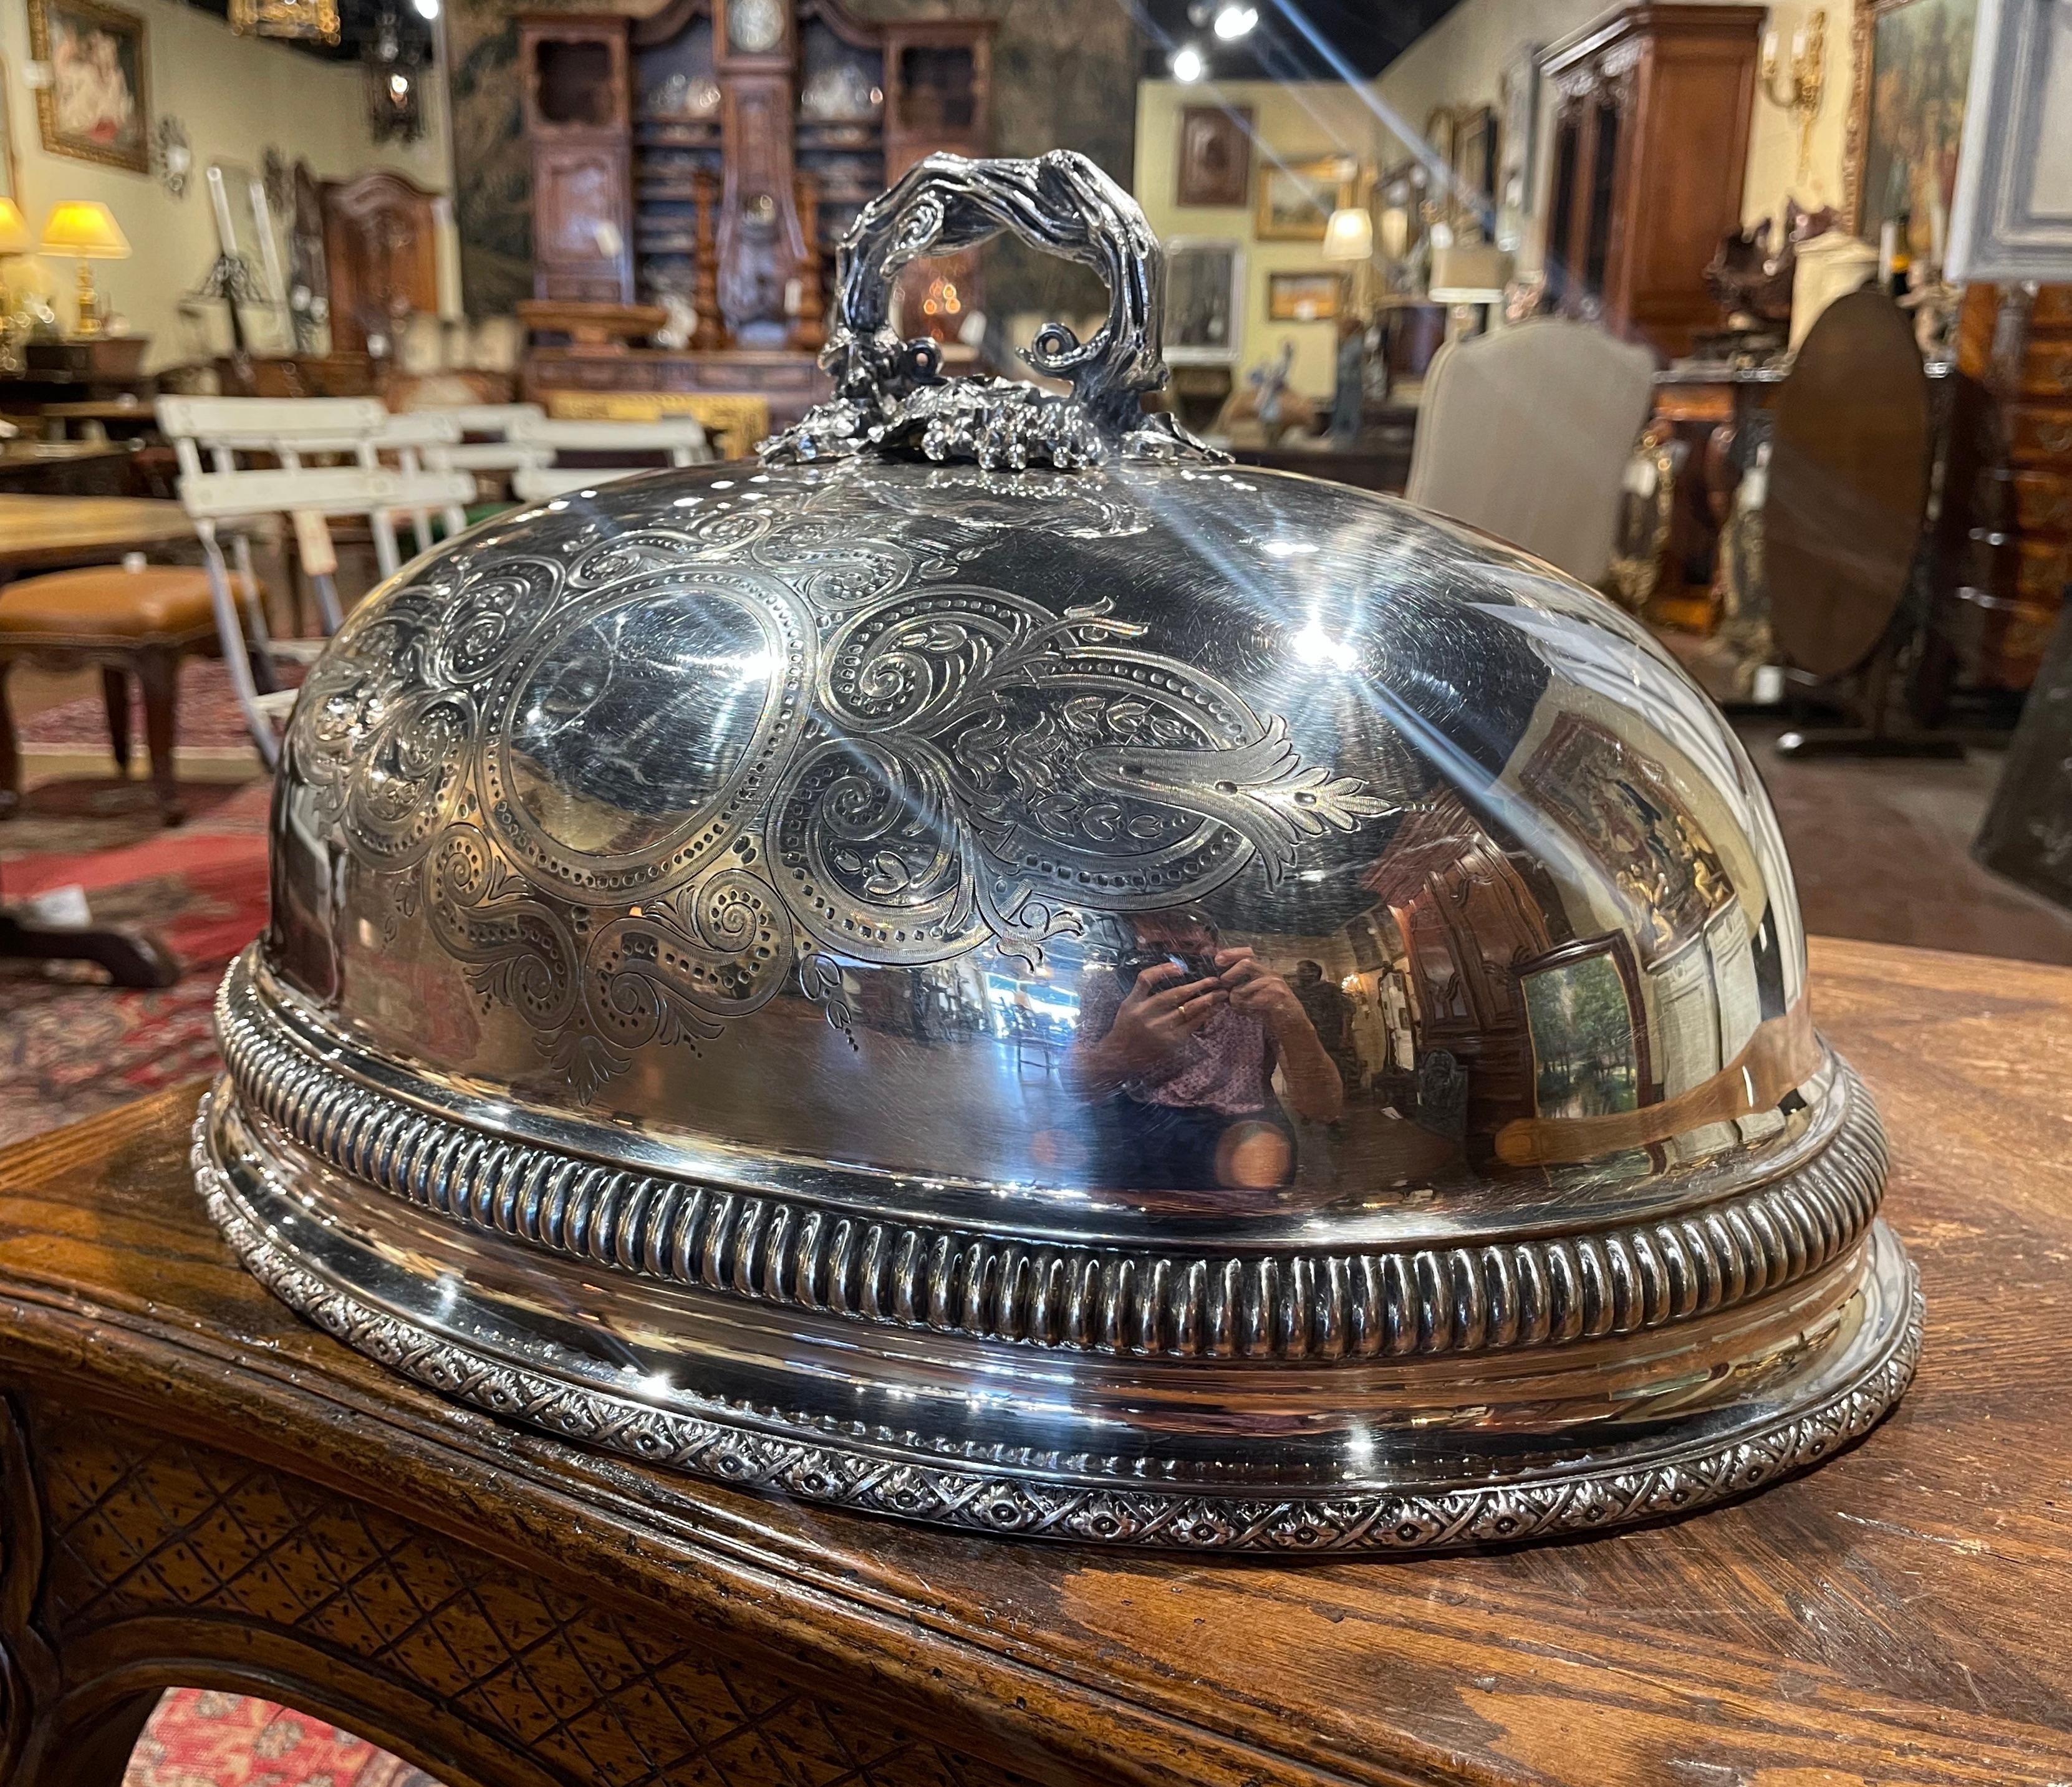 This elegant, antique copper dome likely Sheffield, was created in England, circa 1870. Oval in shape, the traditional meat cover has a fluted body and is topped with a naturalistic tree like handle embellished with vine and grape motifs in high